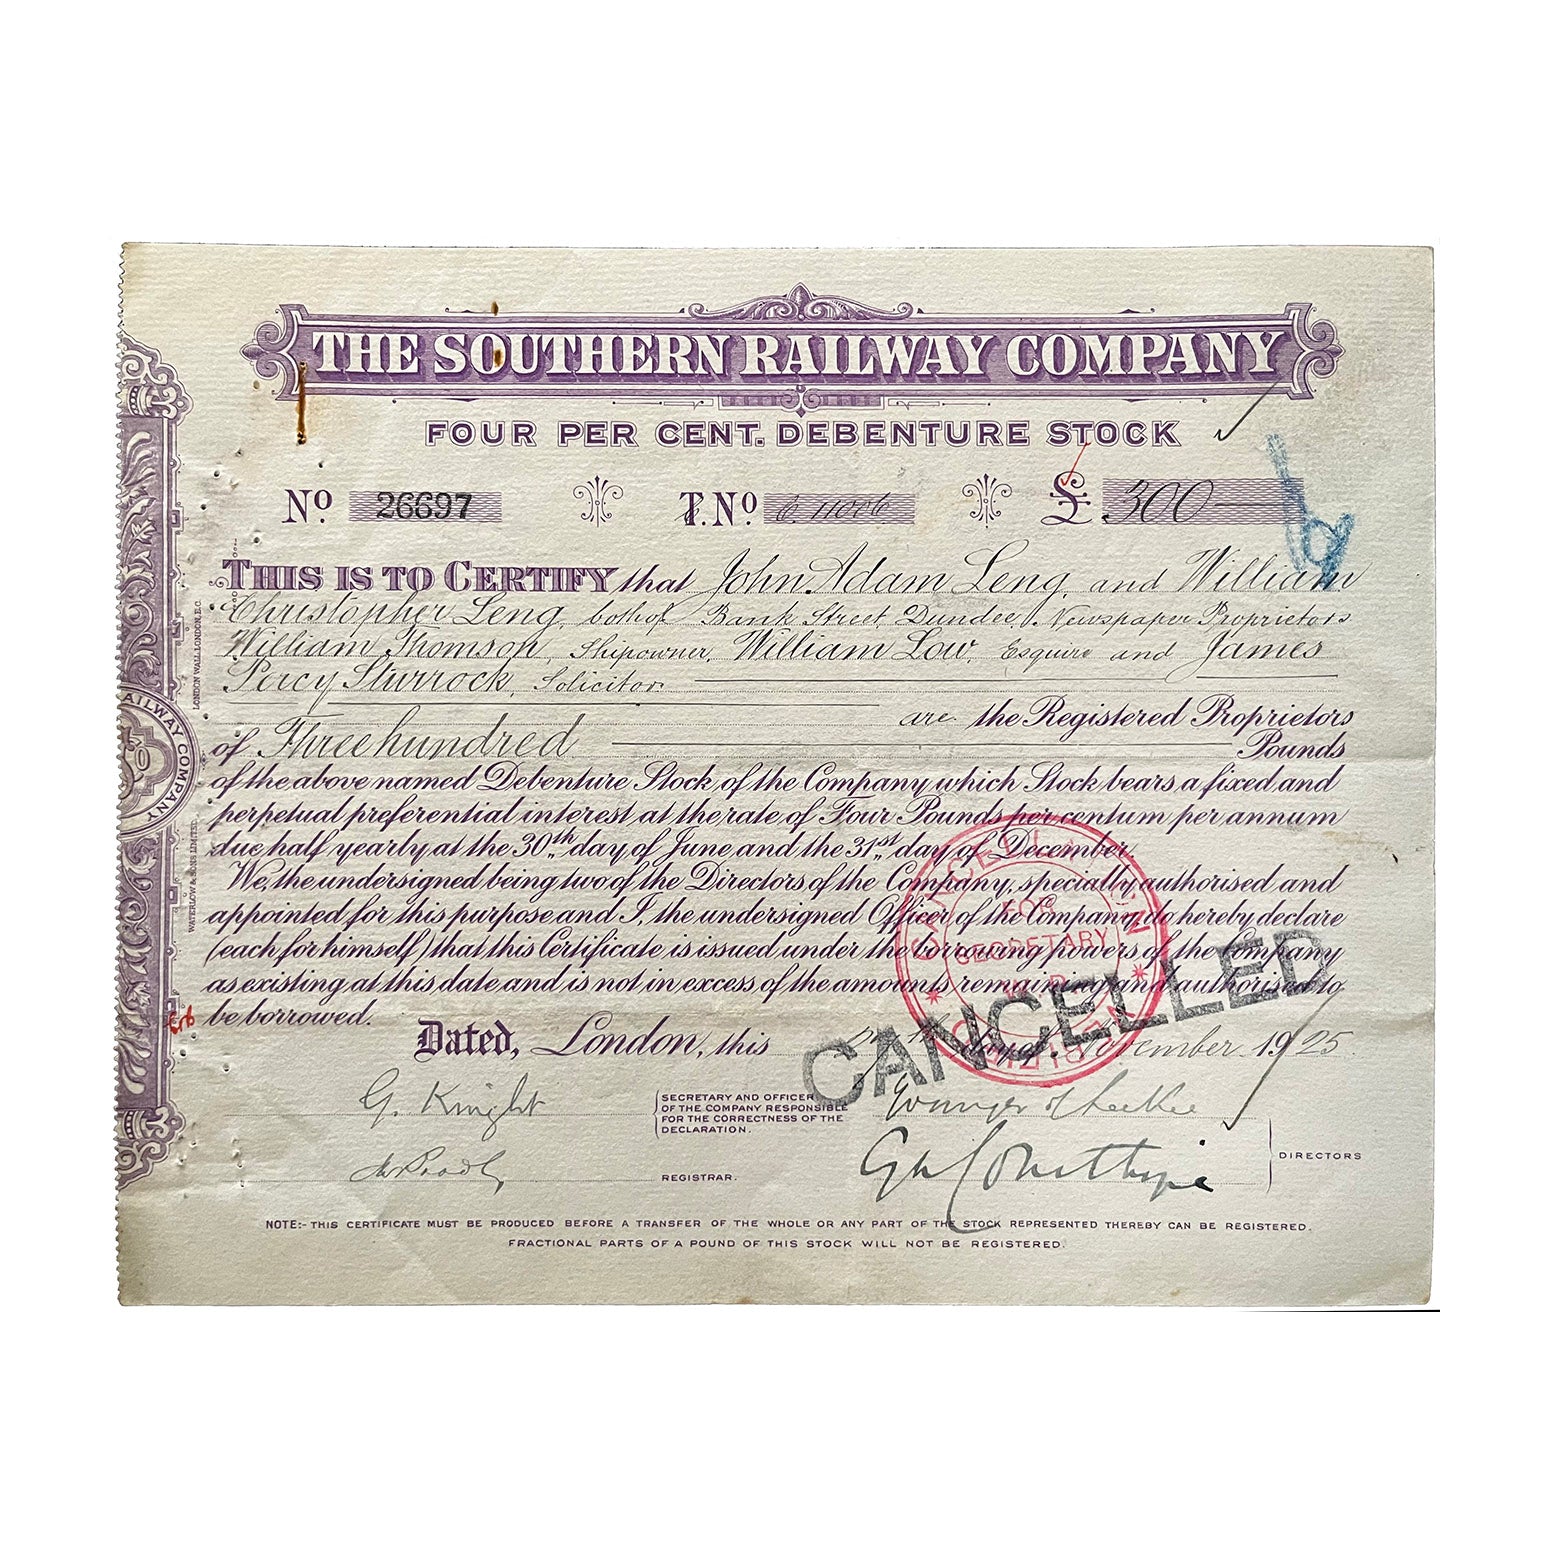 Original railway share certificate, Southern Railway Company, 4% Debenture Preference Stock, £300, issued 1925